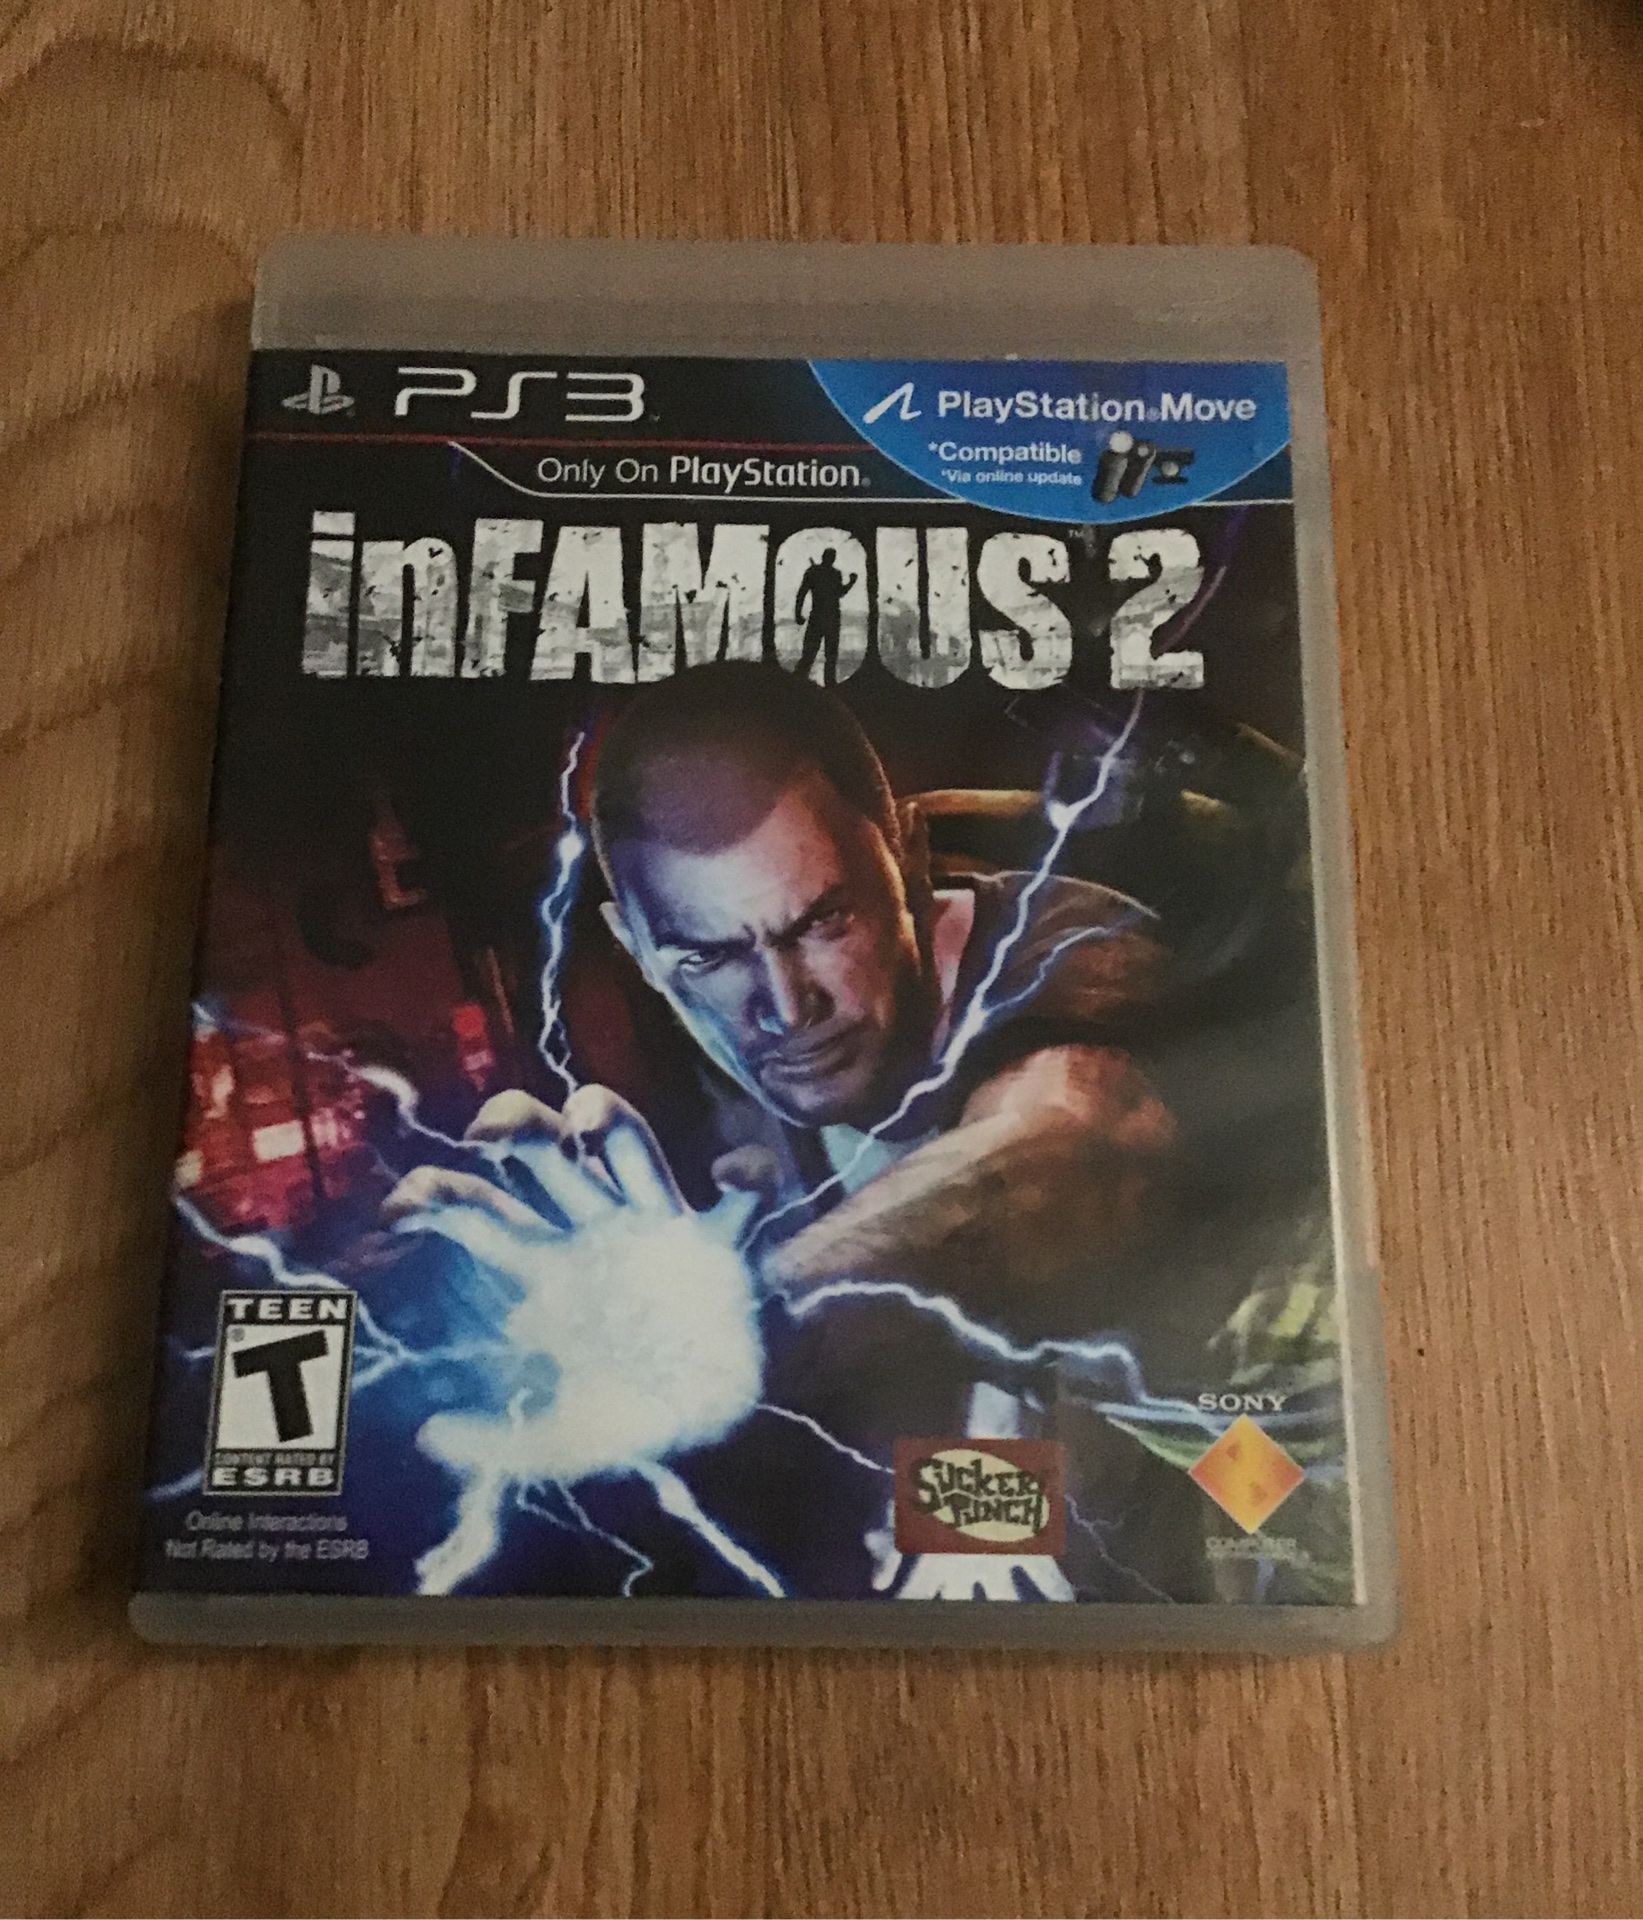 PS3 game